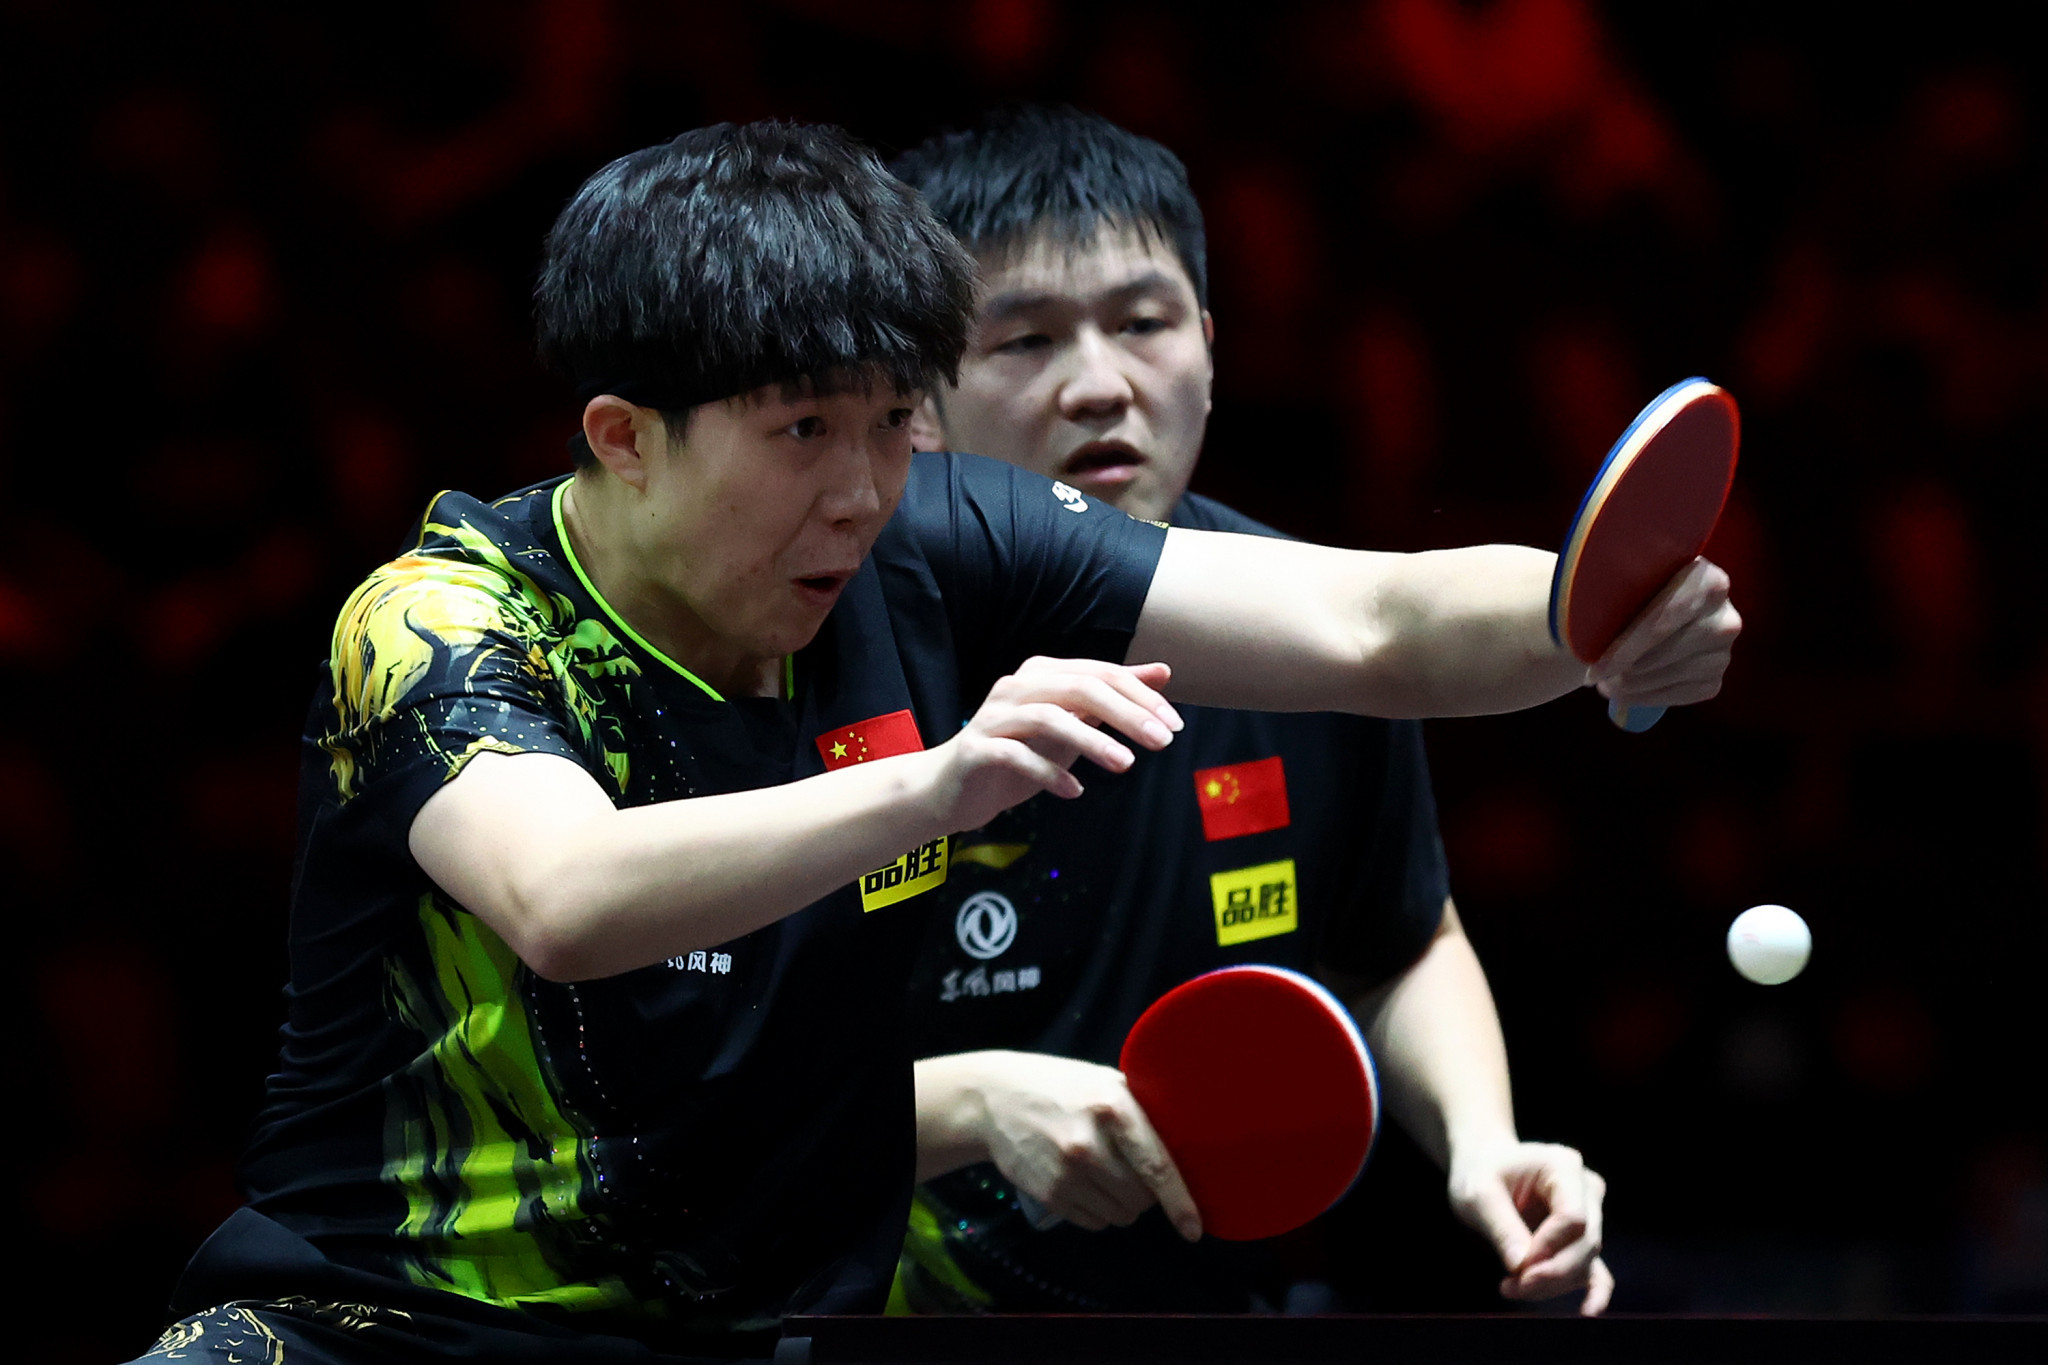 Fan and Wang take clinical doubles victory at World Table Tennis Grand Smash in Singapore